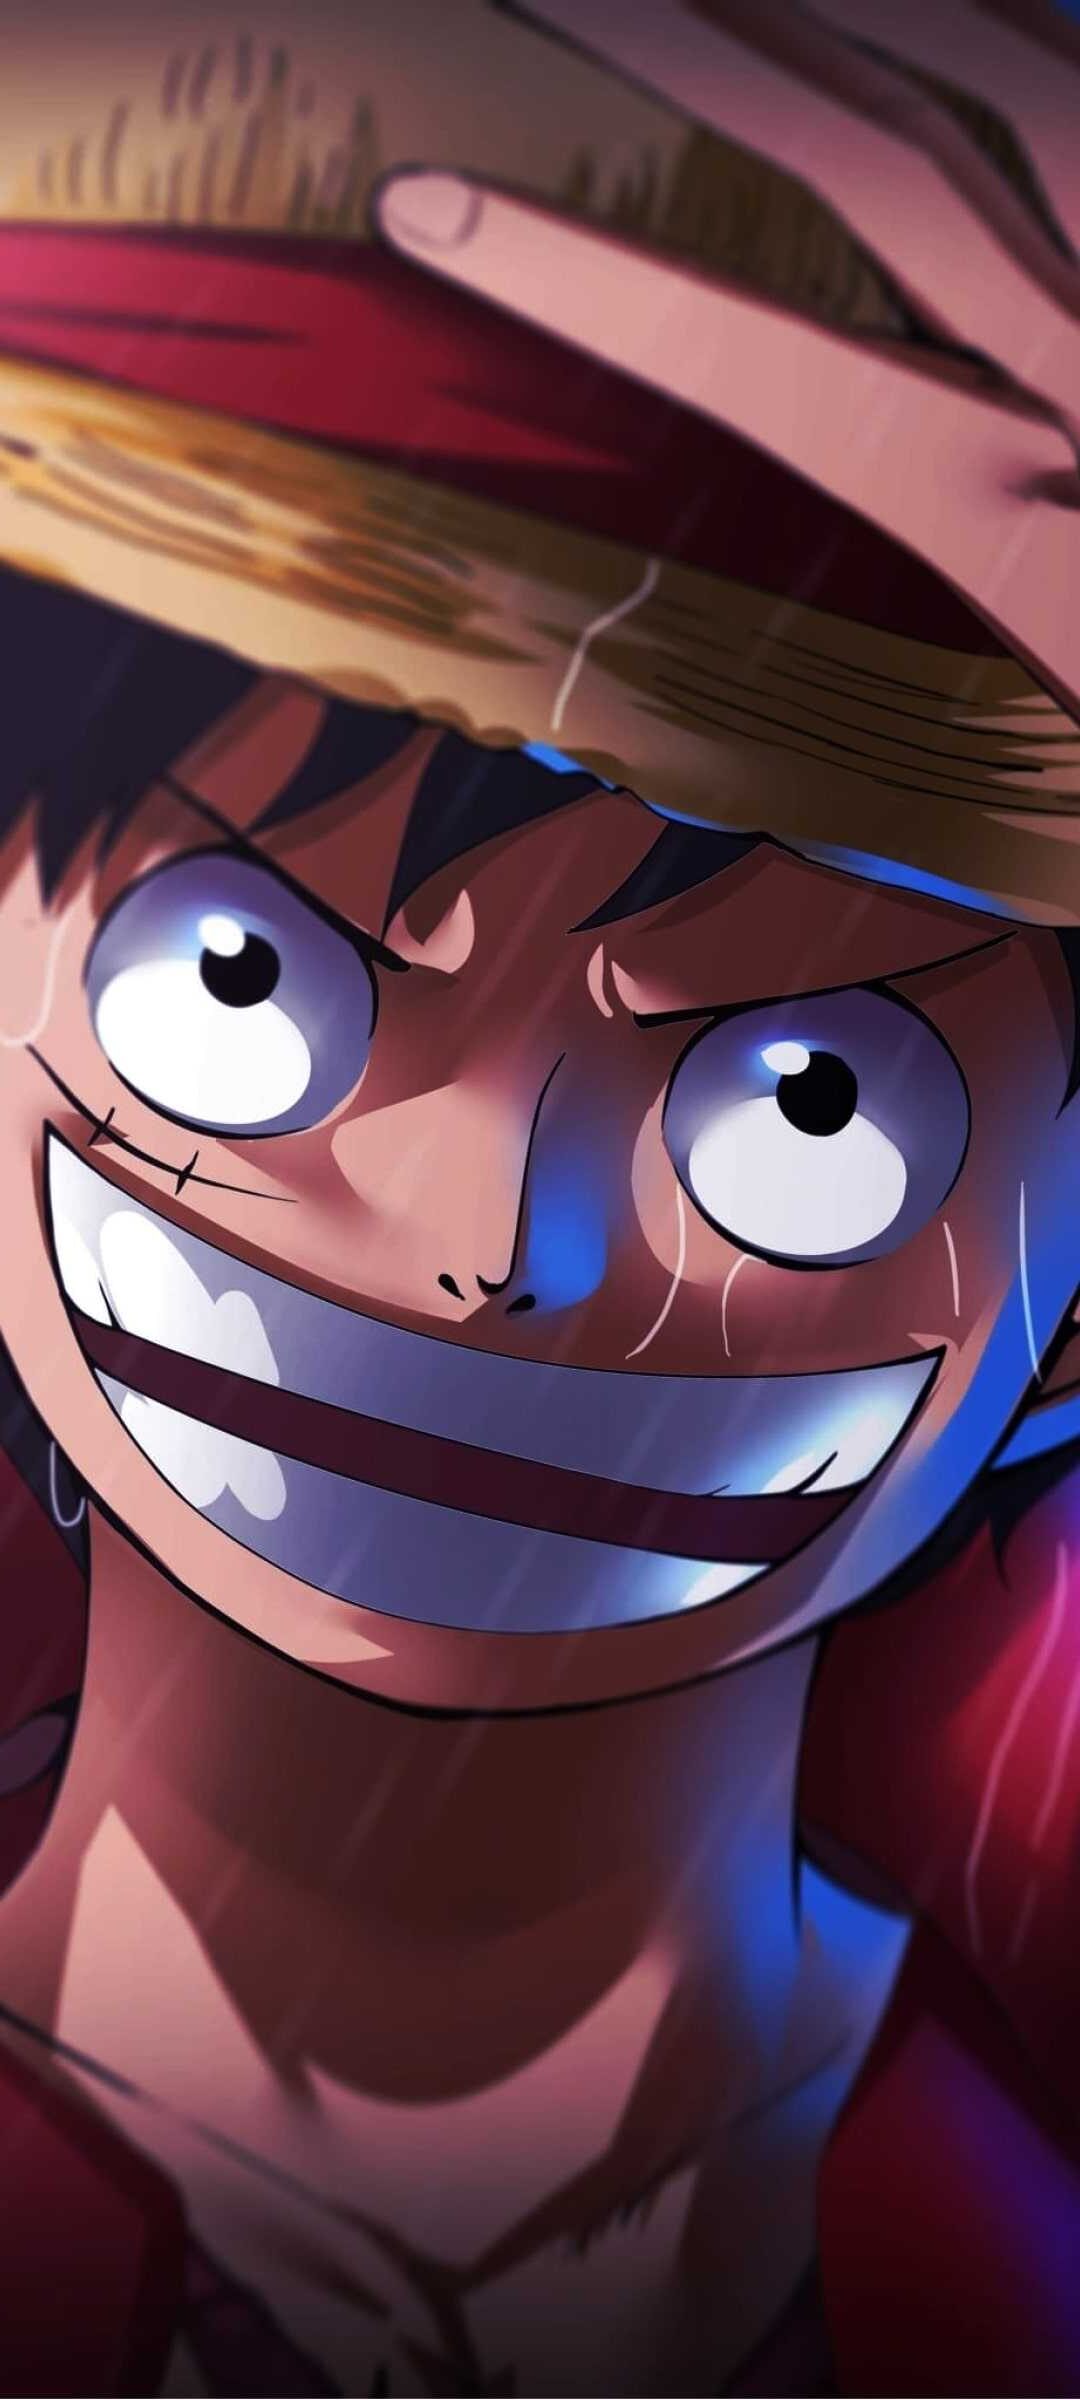 Luffy Angry Wallpaper